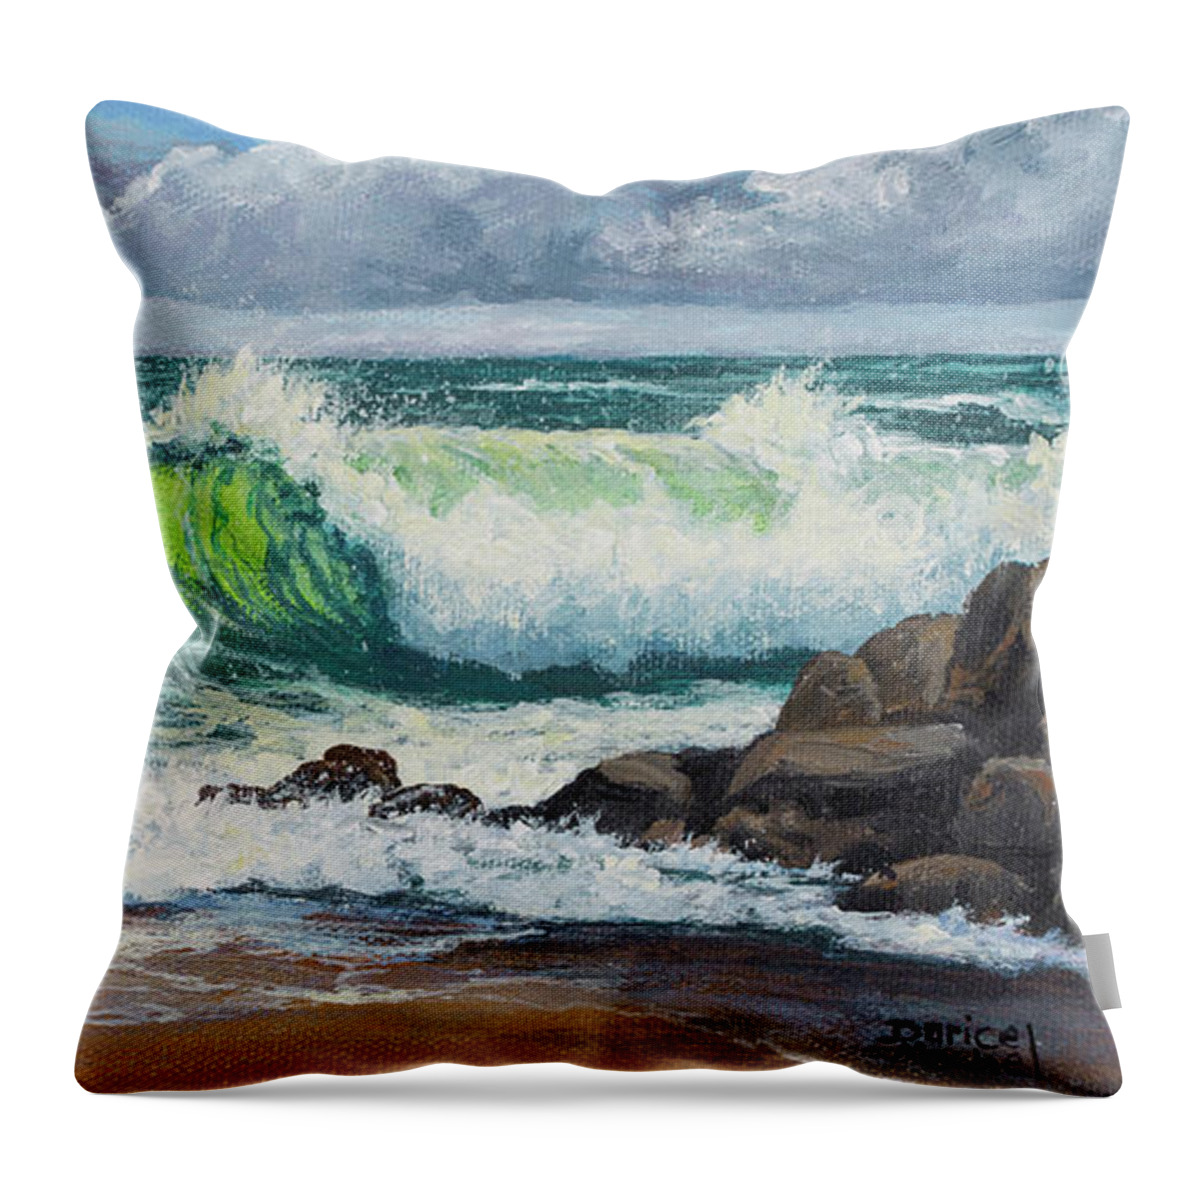 Seascape Throw Pillow featuring the painting Rolling Waves by Darice Machel McGuire